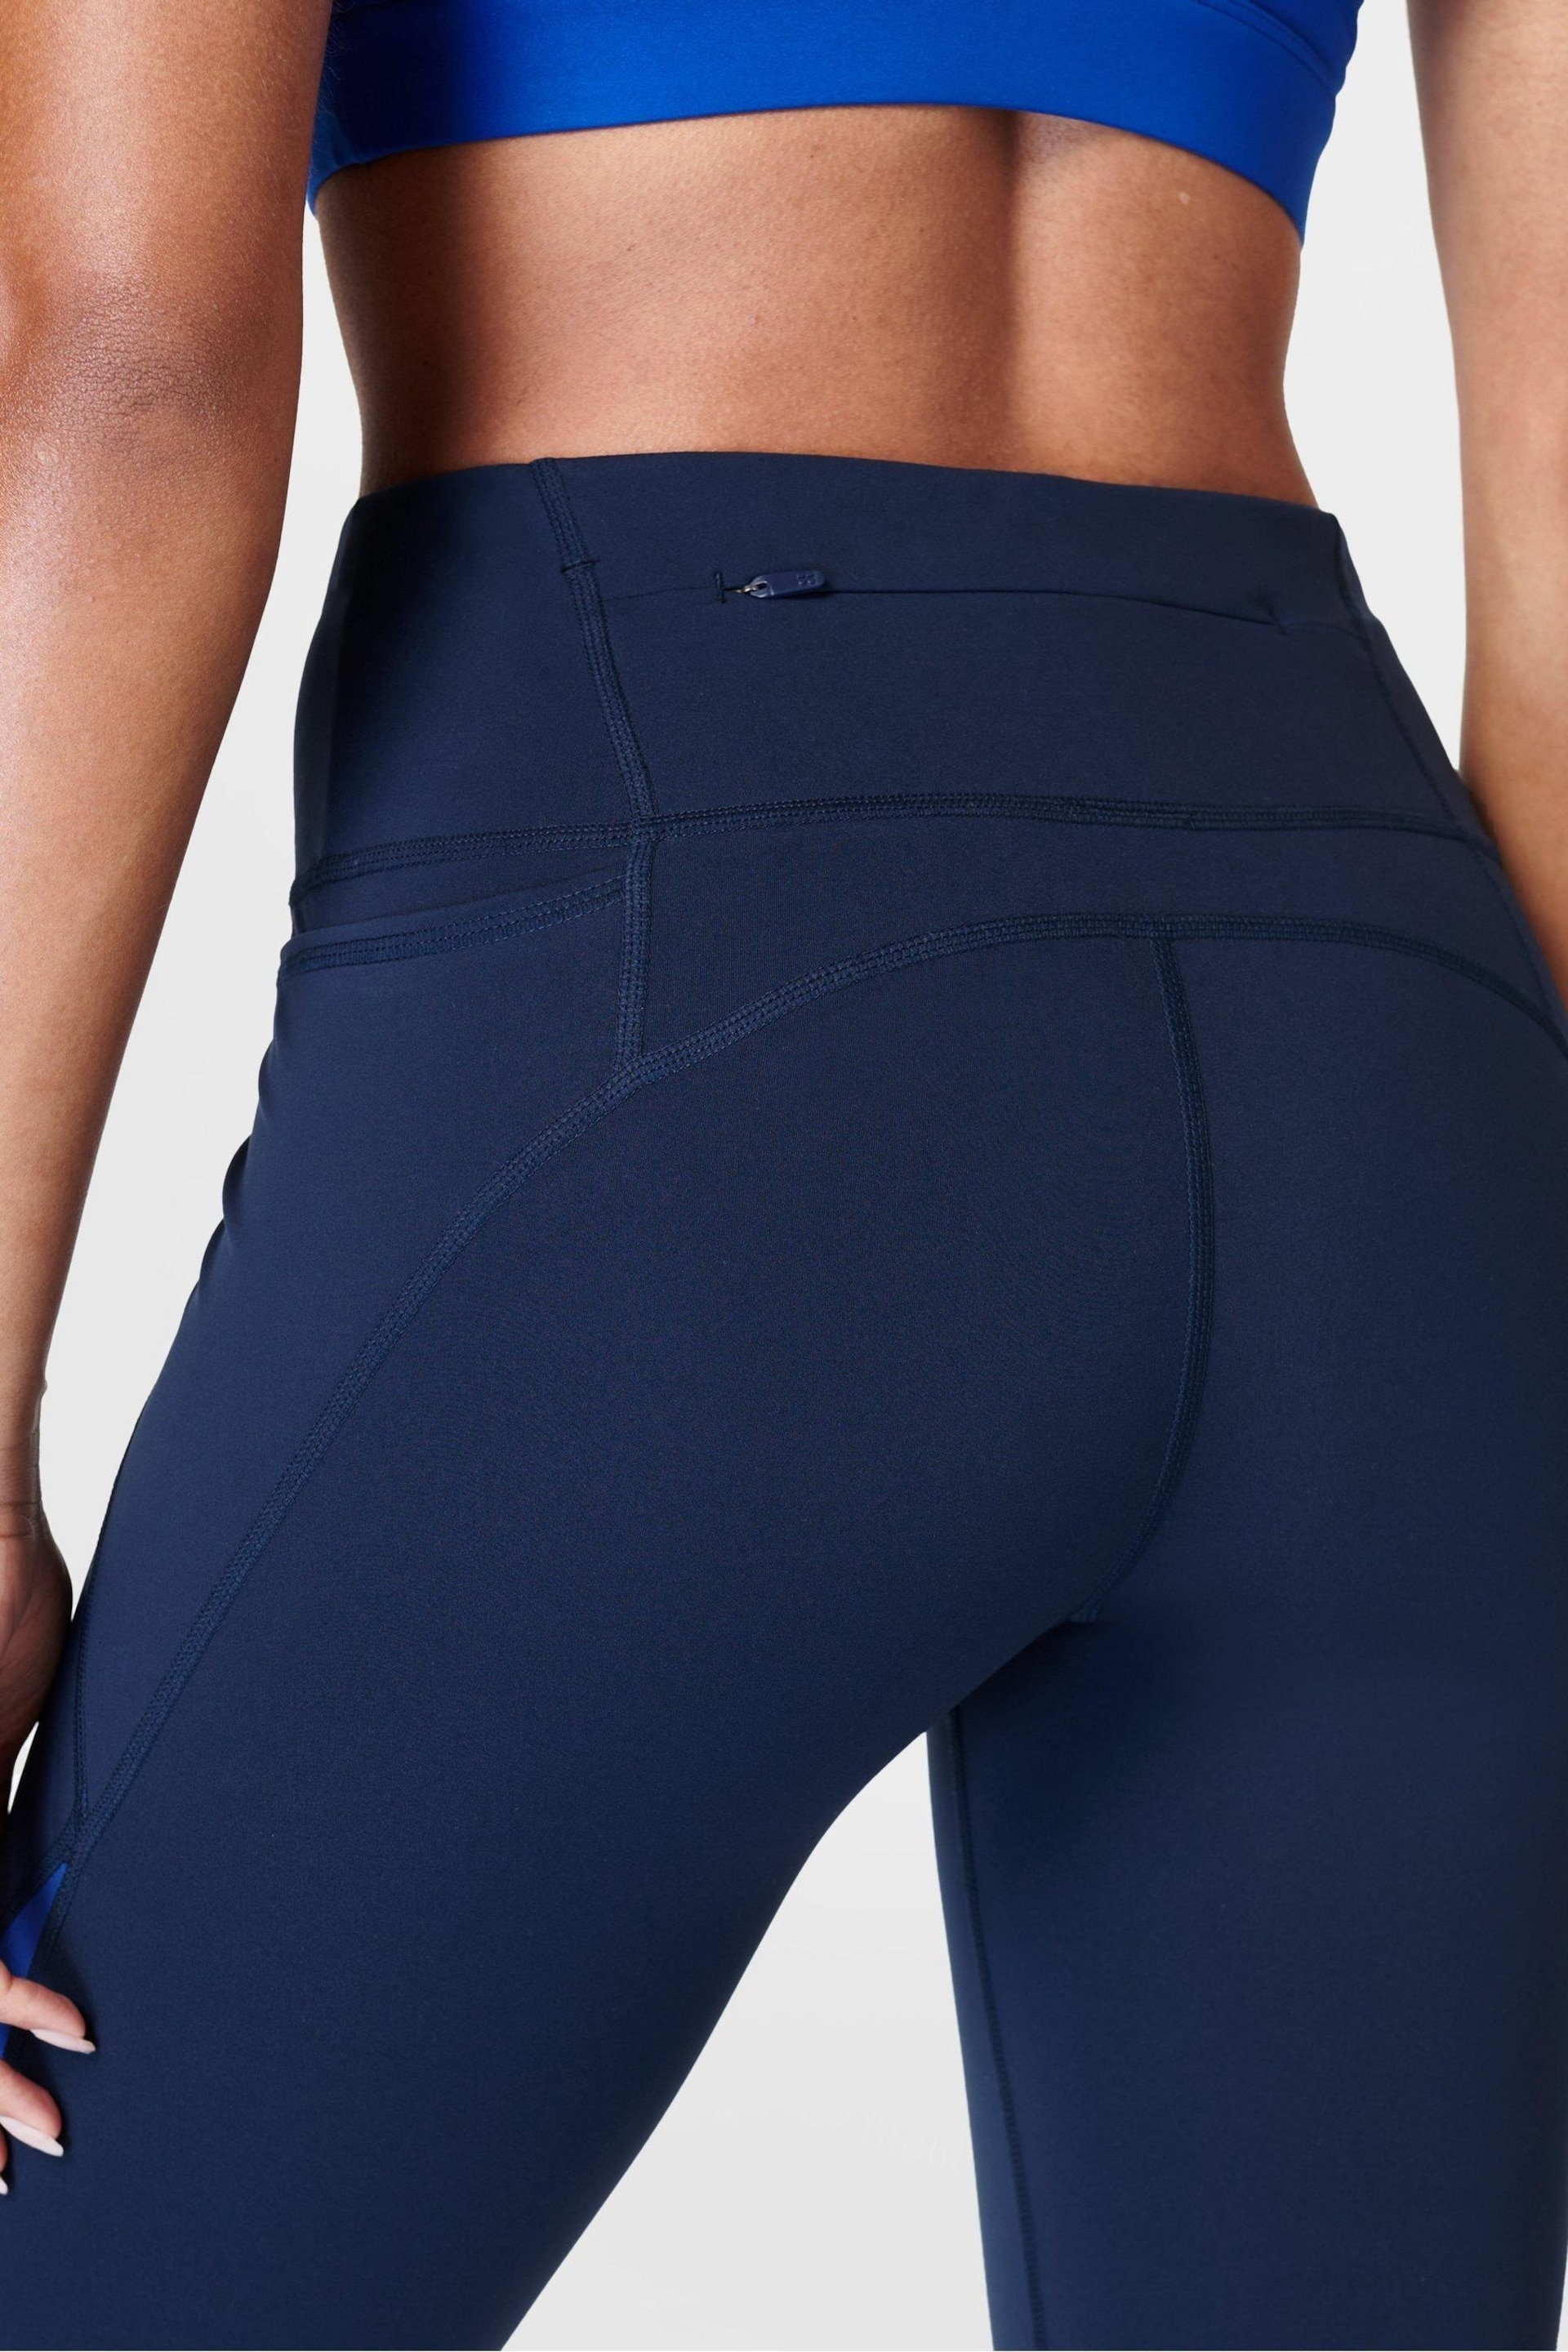 Sweaty Betty Lightning Navy Blue 7/8 Length Power Workout Colour Curve Leggings - Image 6 of 7